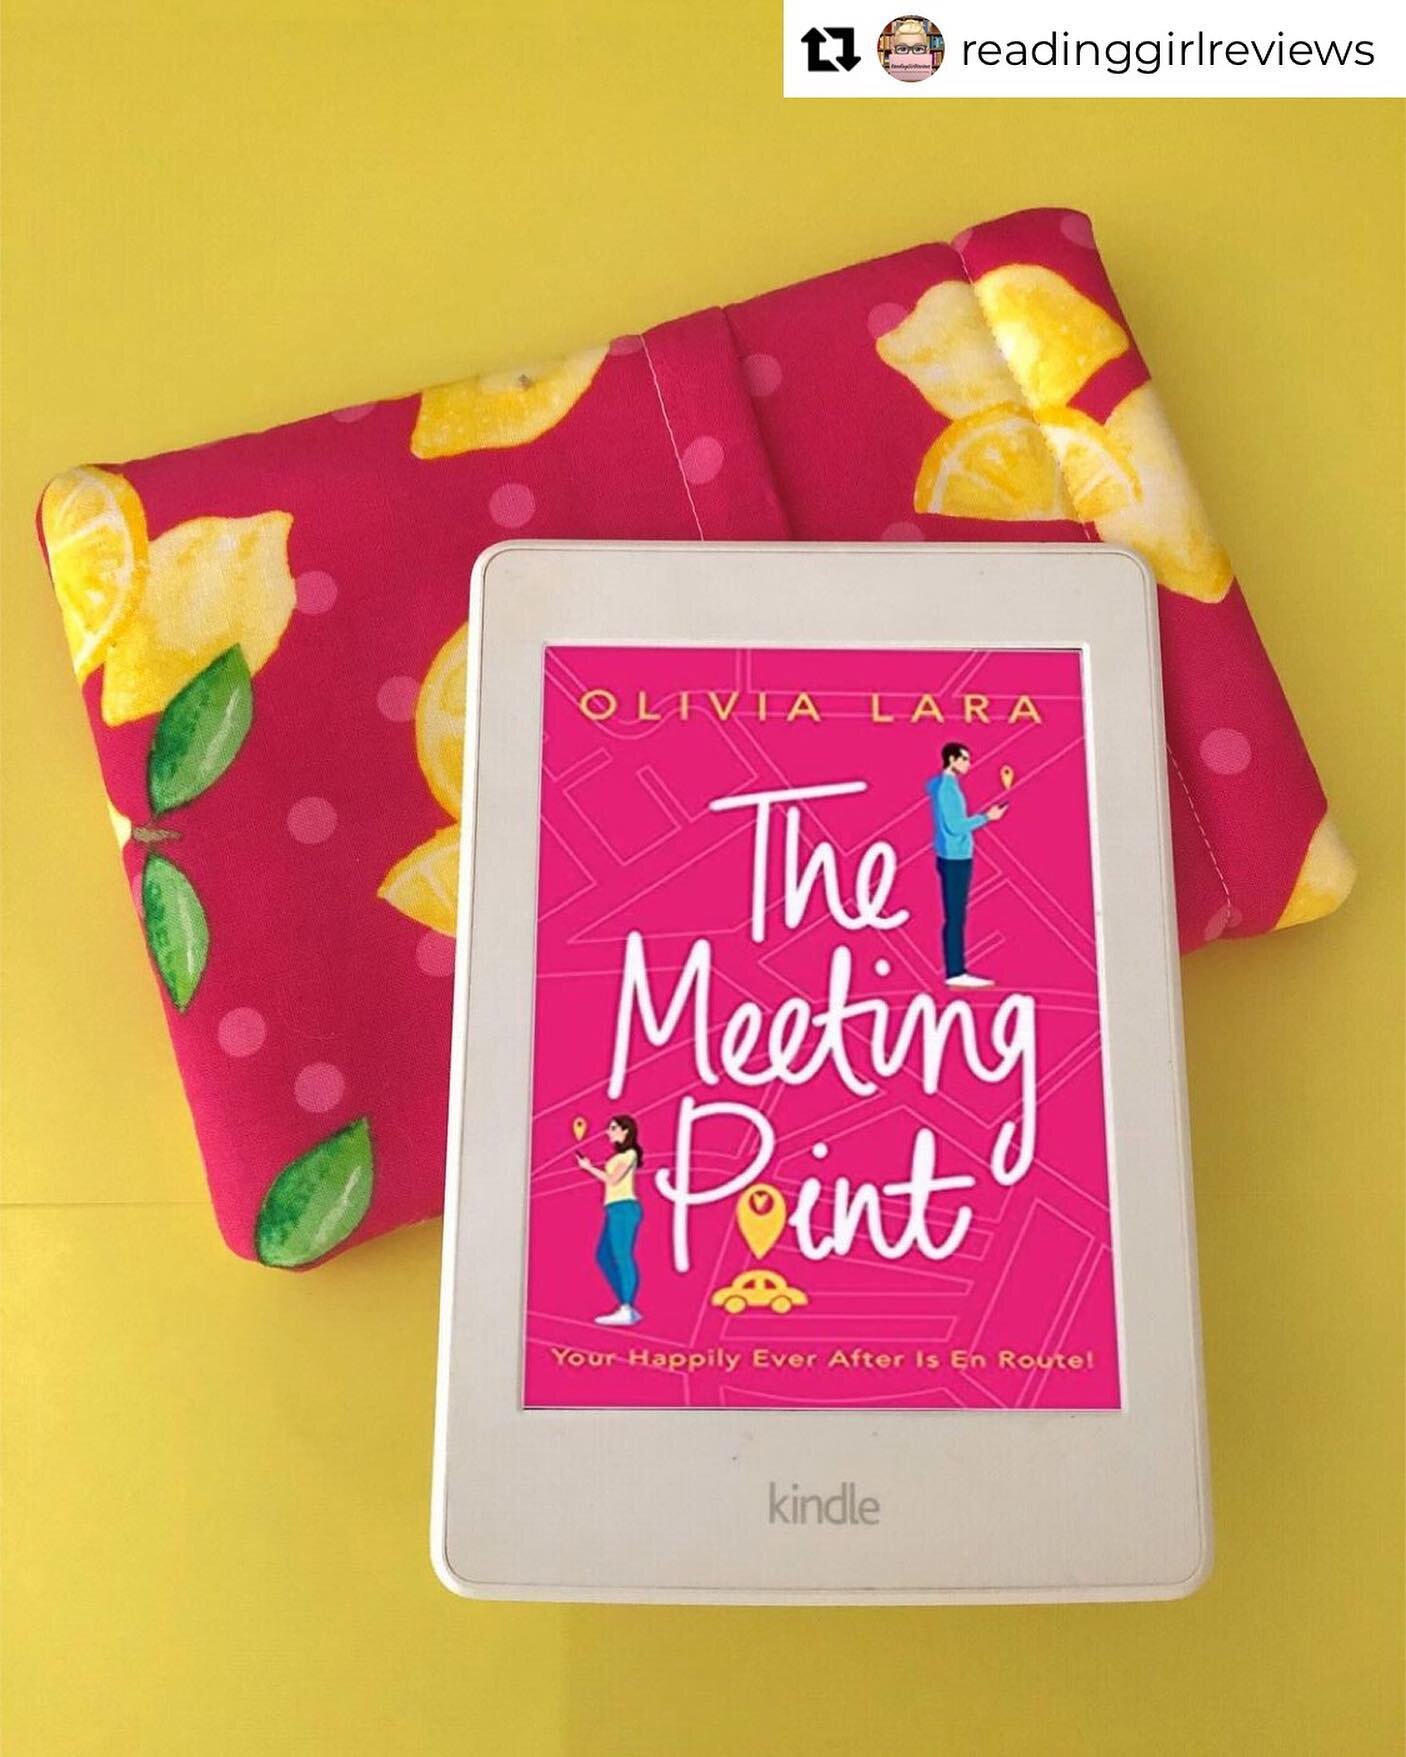 Repost from @readinggirlreviews
&bull;
.
OMG THE MEETING POINT!
This adorable and heartwarming rom-com by @olivialara.writes @ariafiction @headofzeus releases in digital form on 9/2 and it&rsquo;s just perfect.

Filled with cuteness, an amazing local